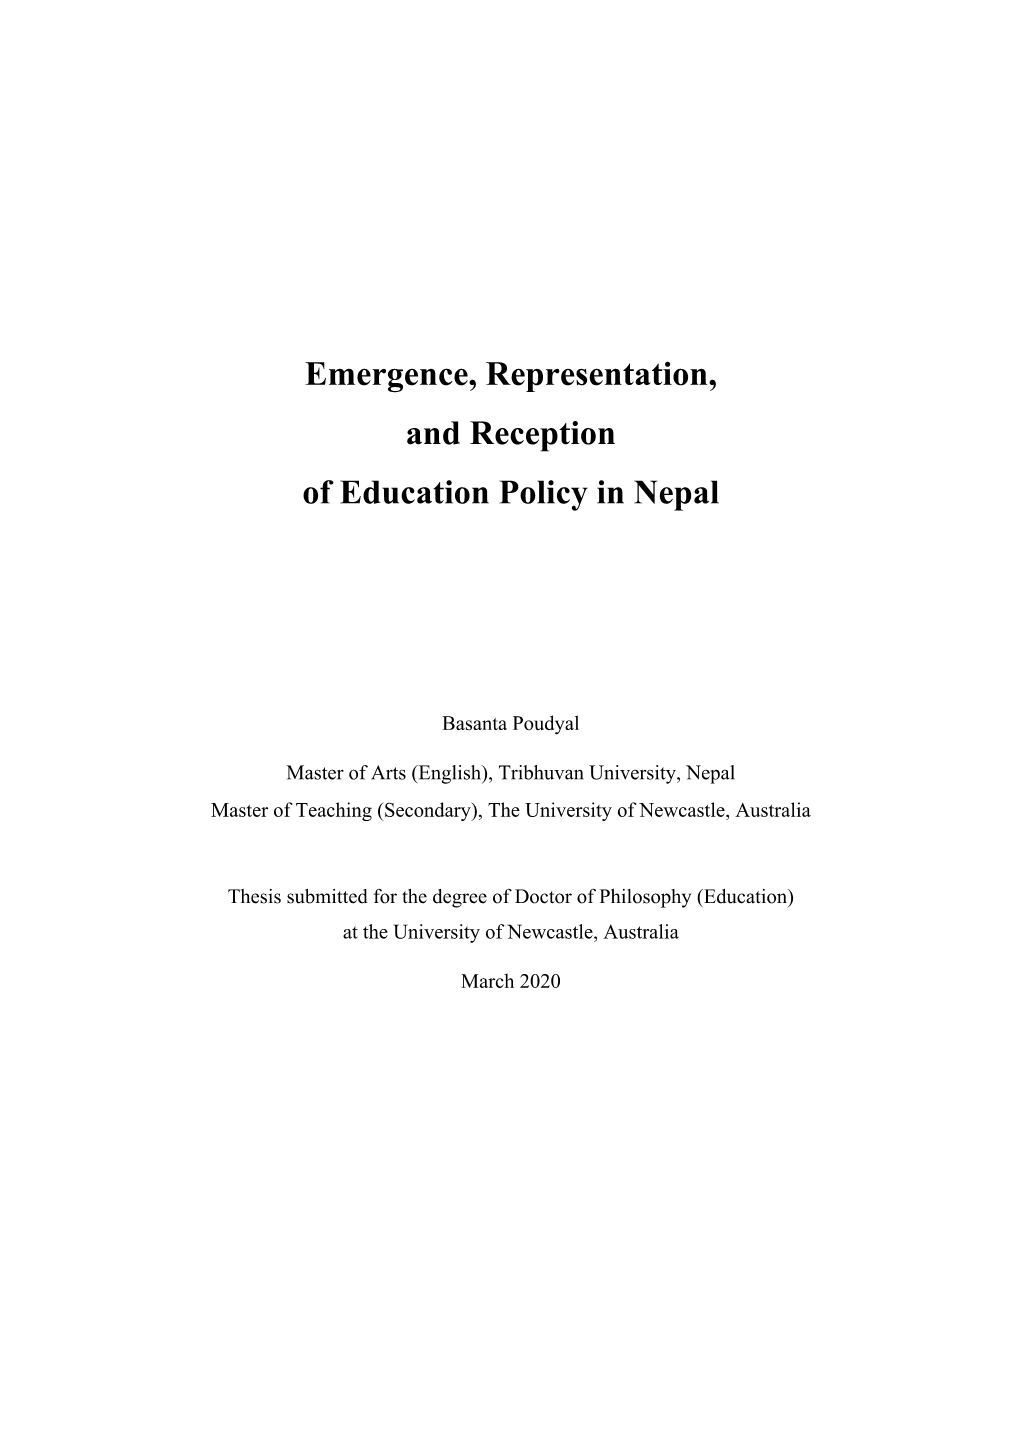 Emergence, Representation, and Reception of Education Policy in Nepal